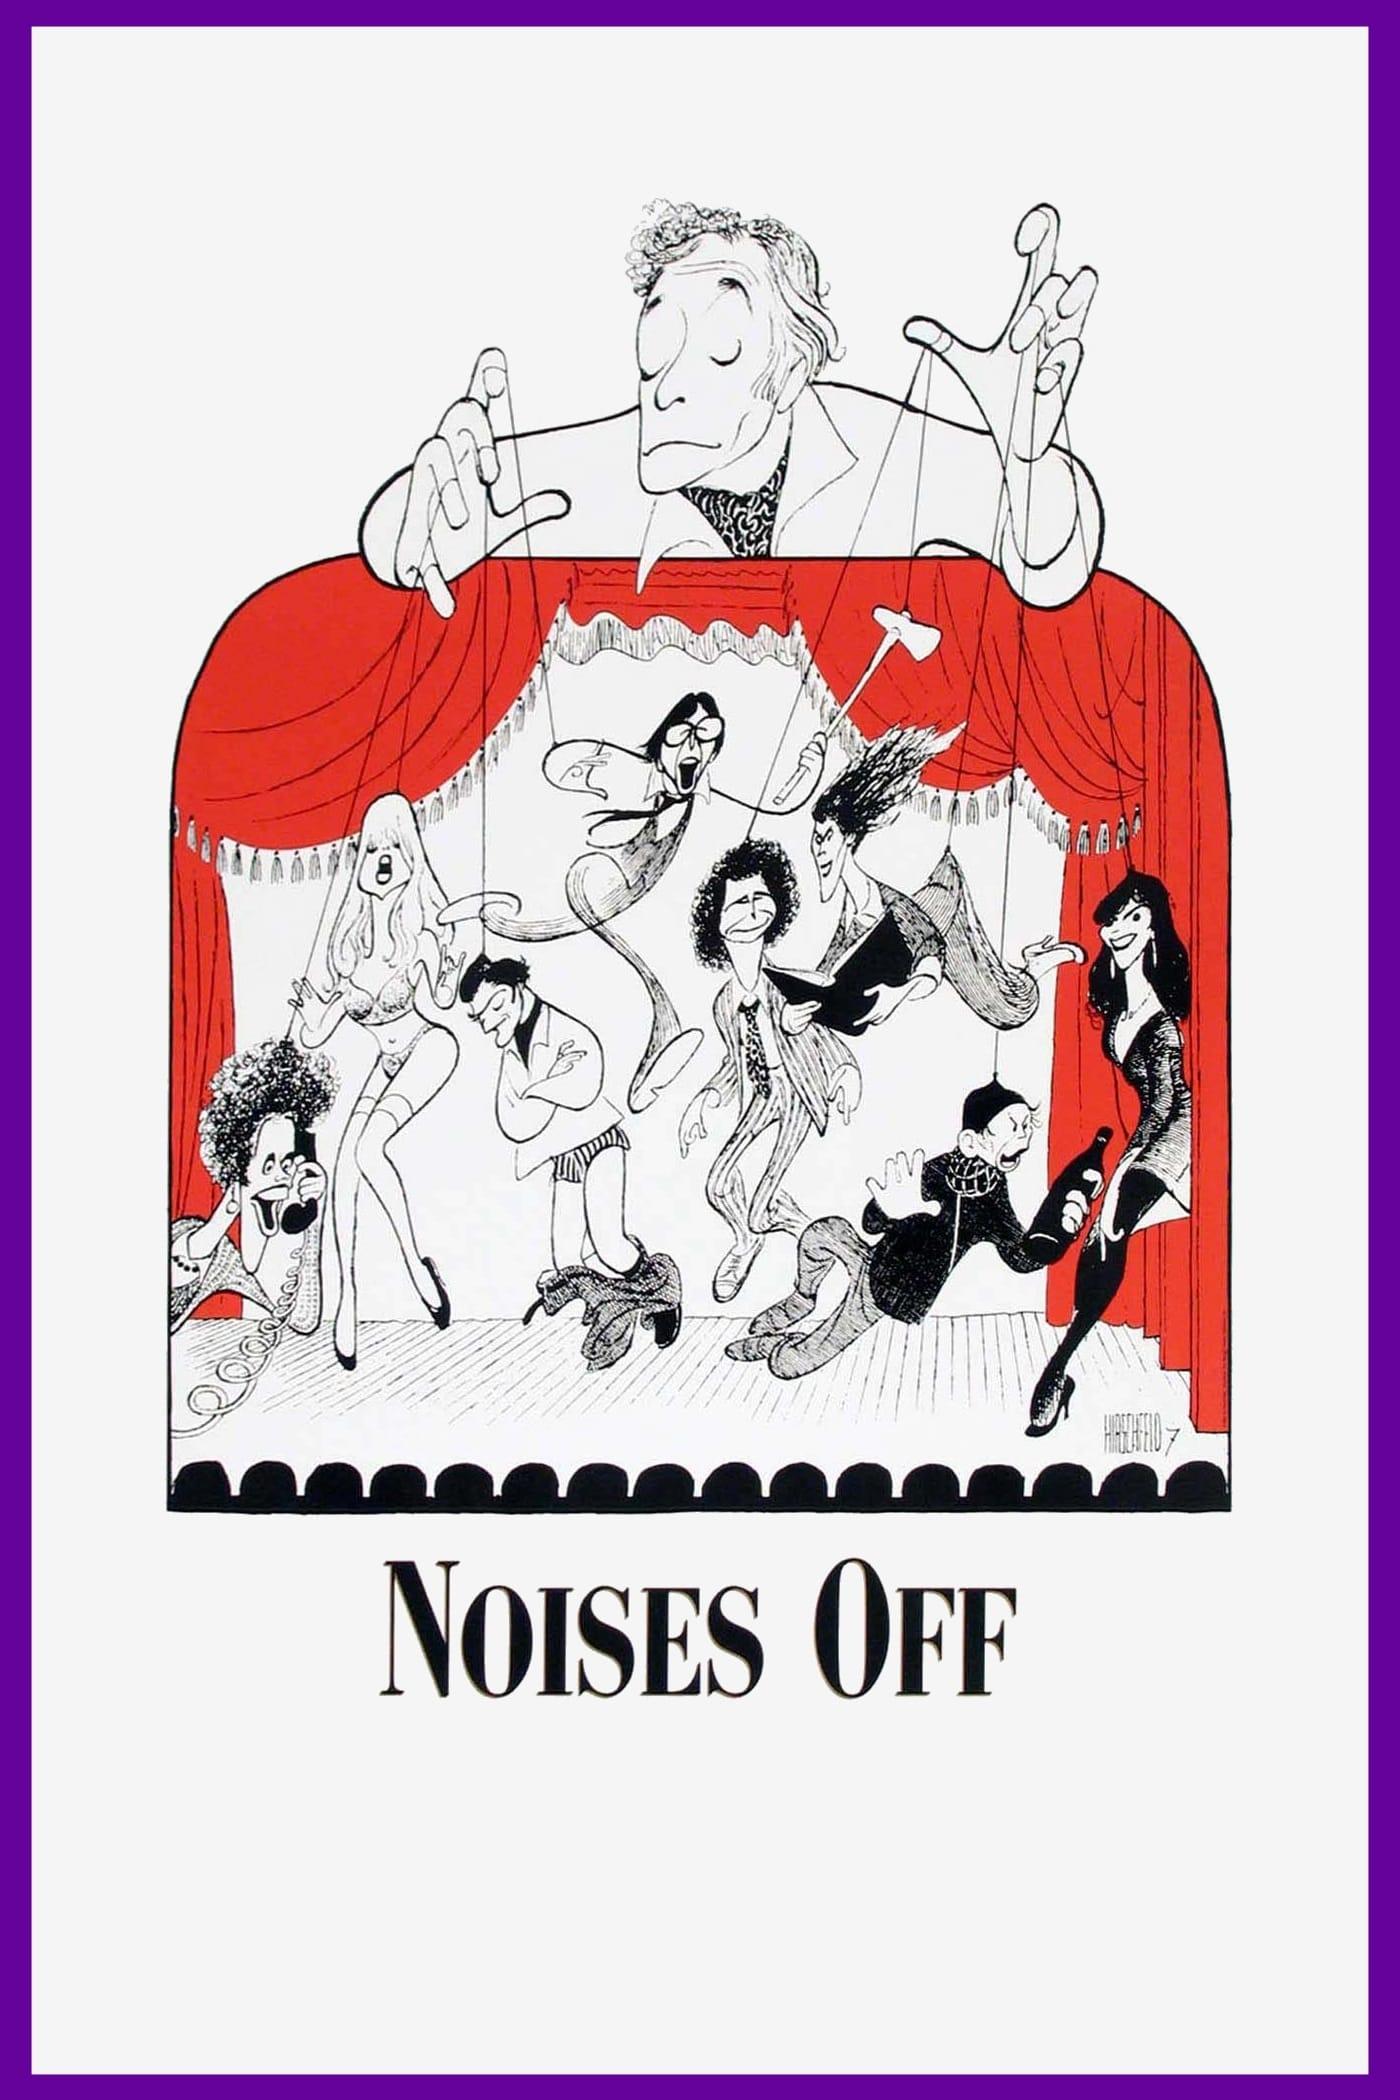 Noises Off... poster